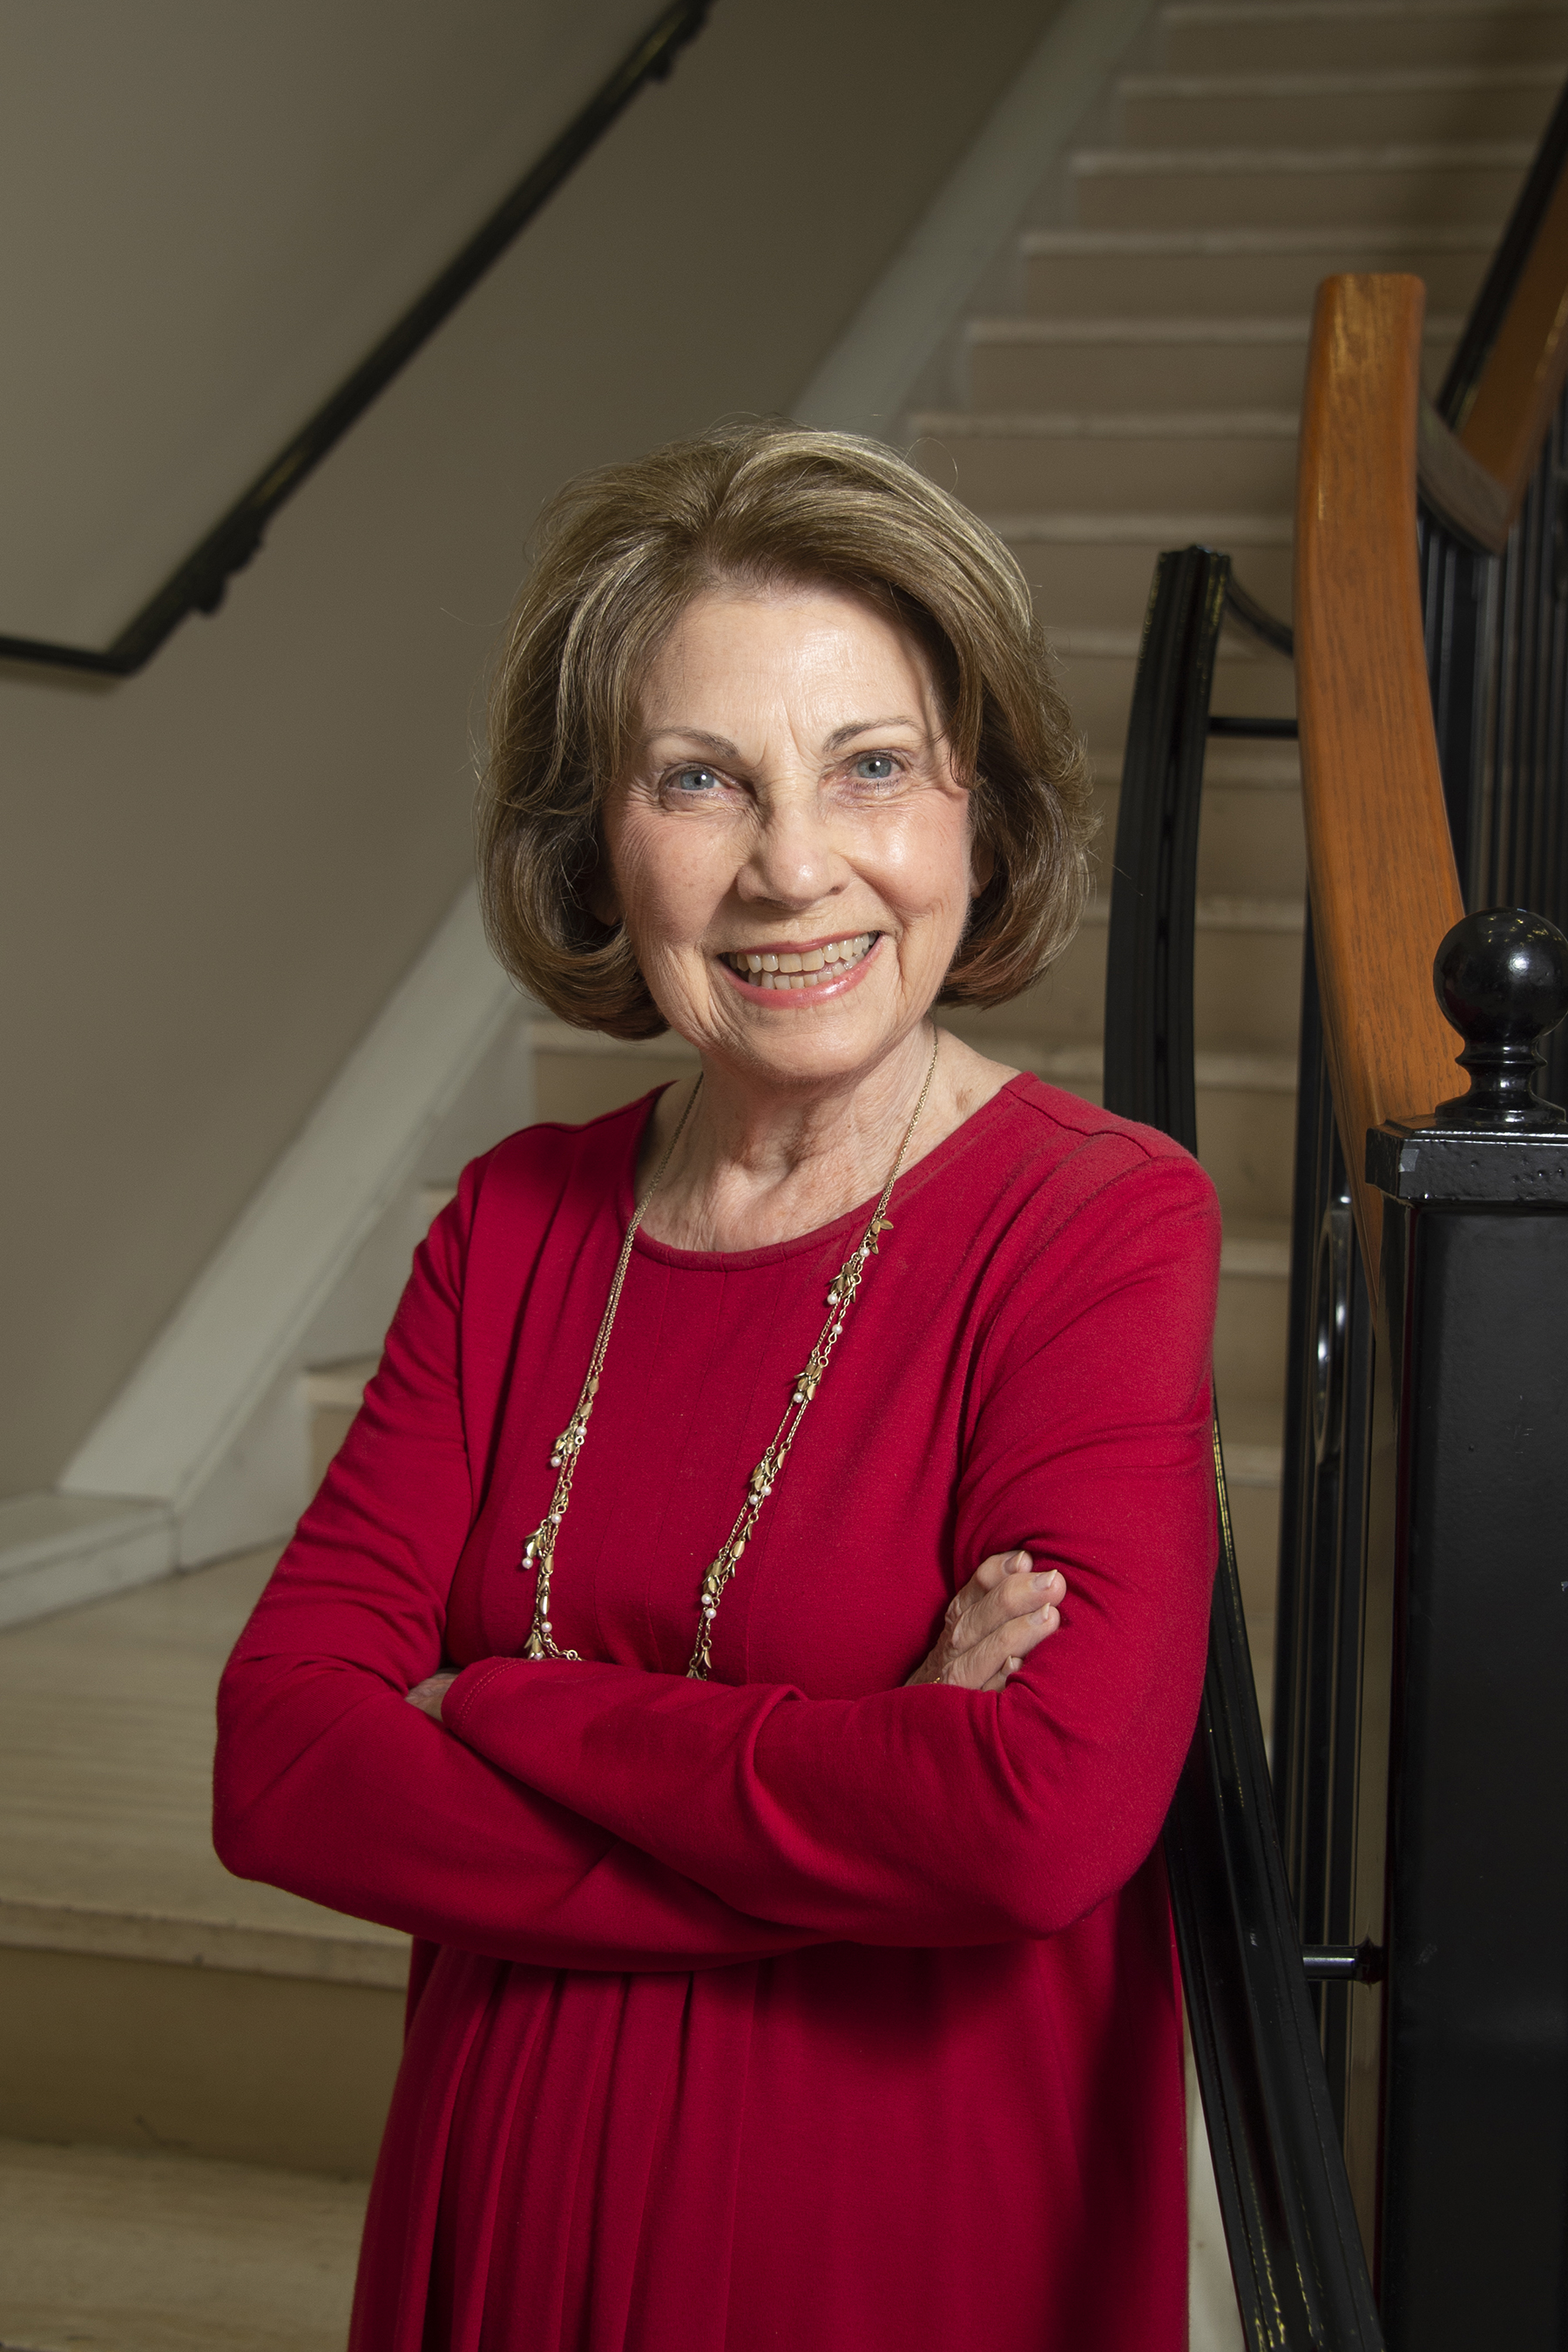 AT AGE 85, THIS 2022 SMU GRADUATE IS READY TO AIM HER DIPLOMA AT A NEW  CAREER AS A SCREENWRITER - SMU